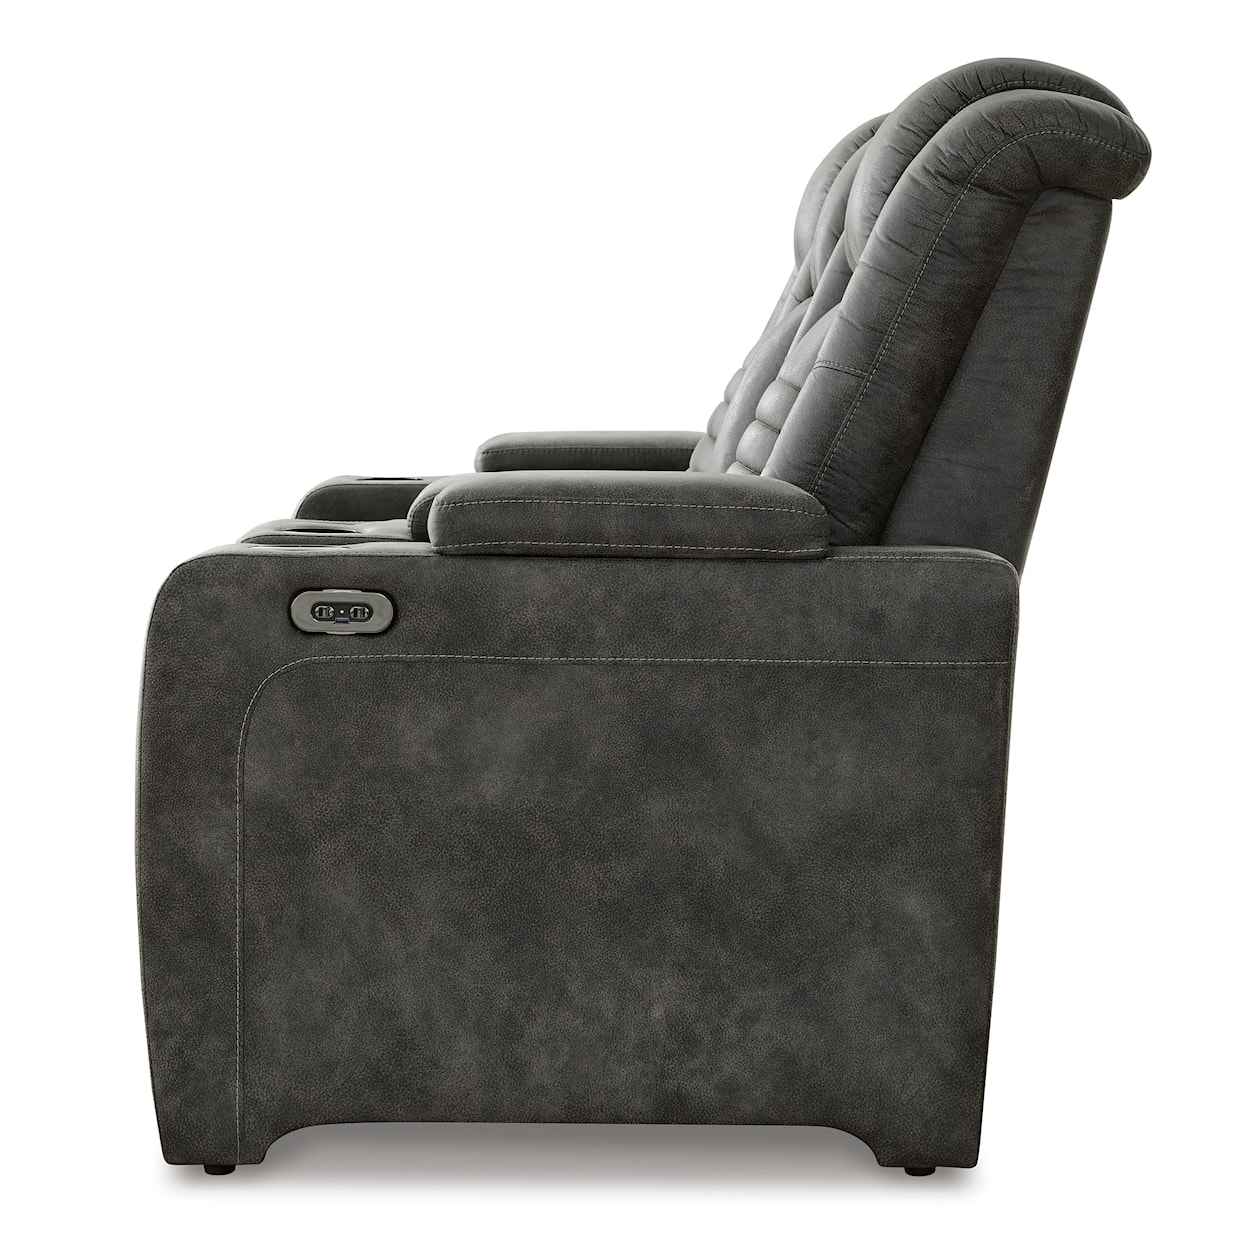 Signature Soundcheck Power Reclining Loveseat w/ Console